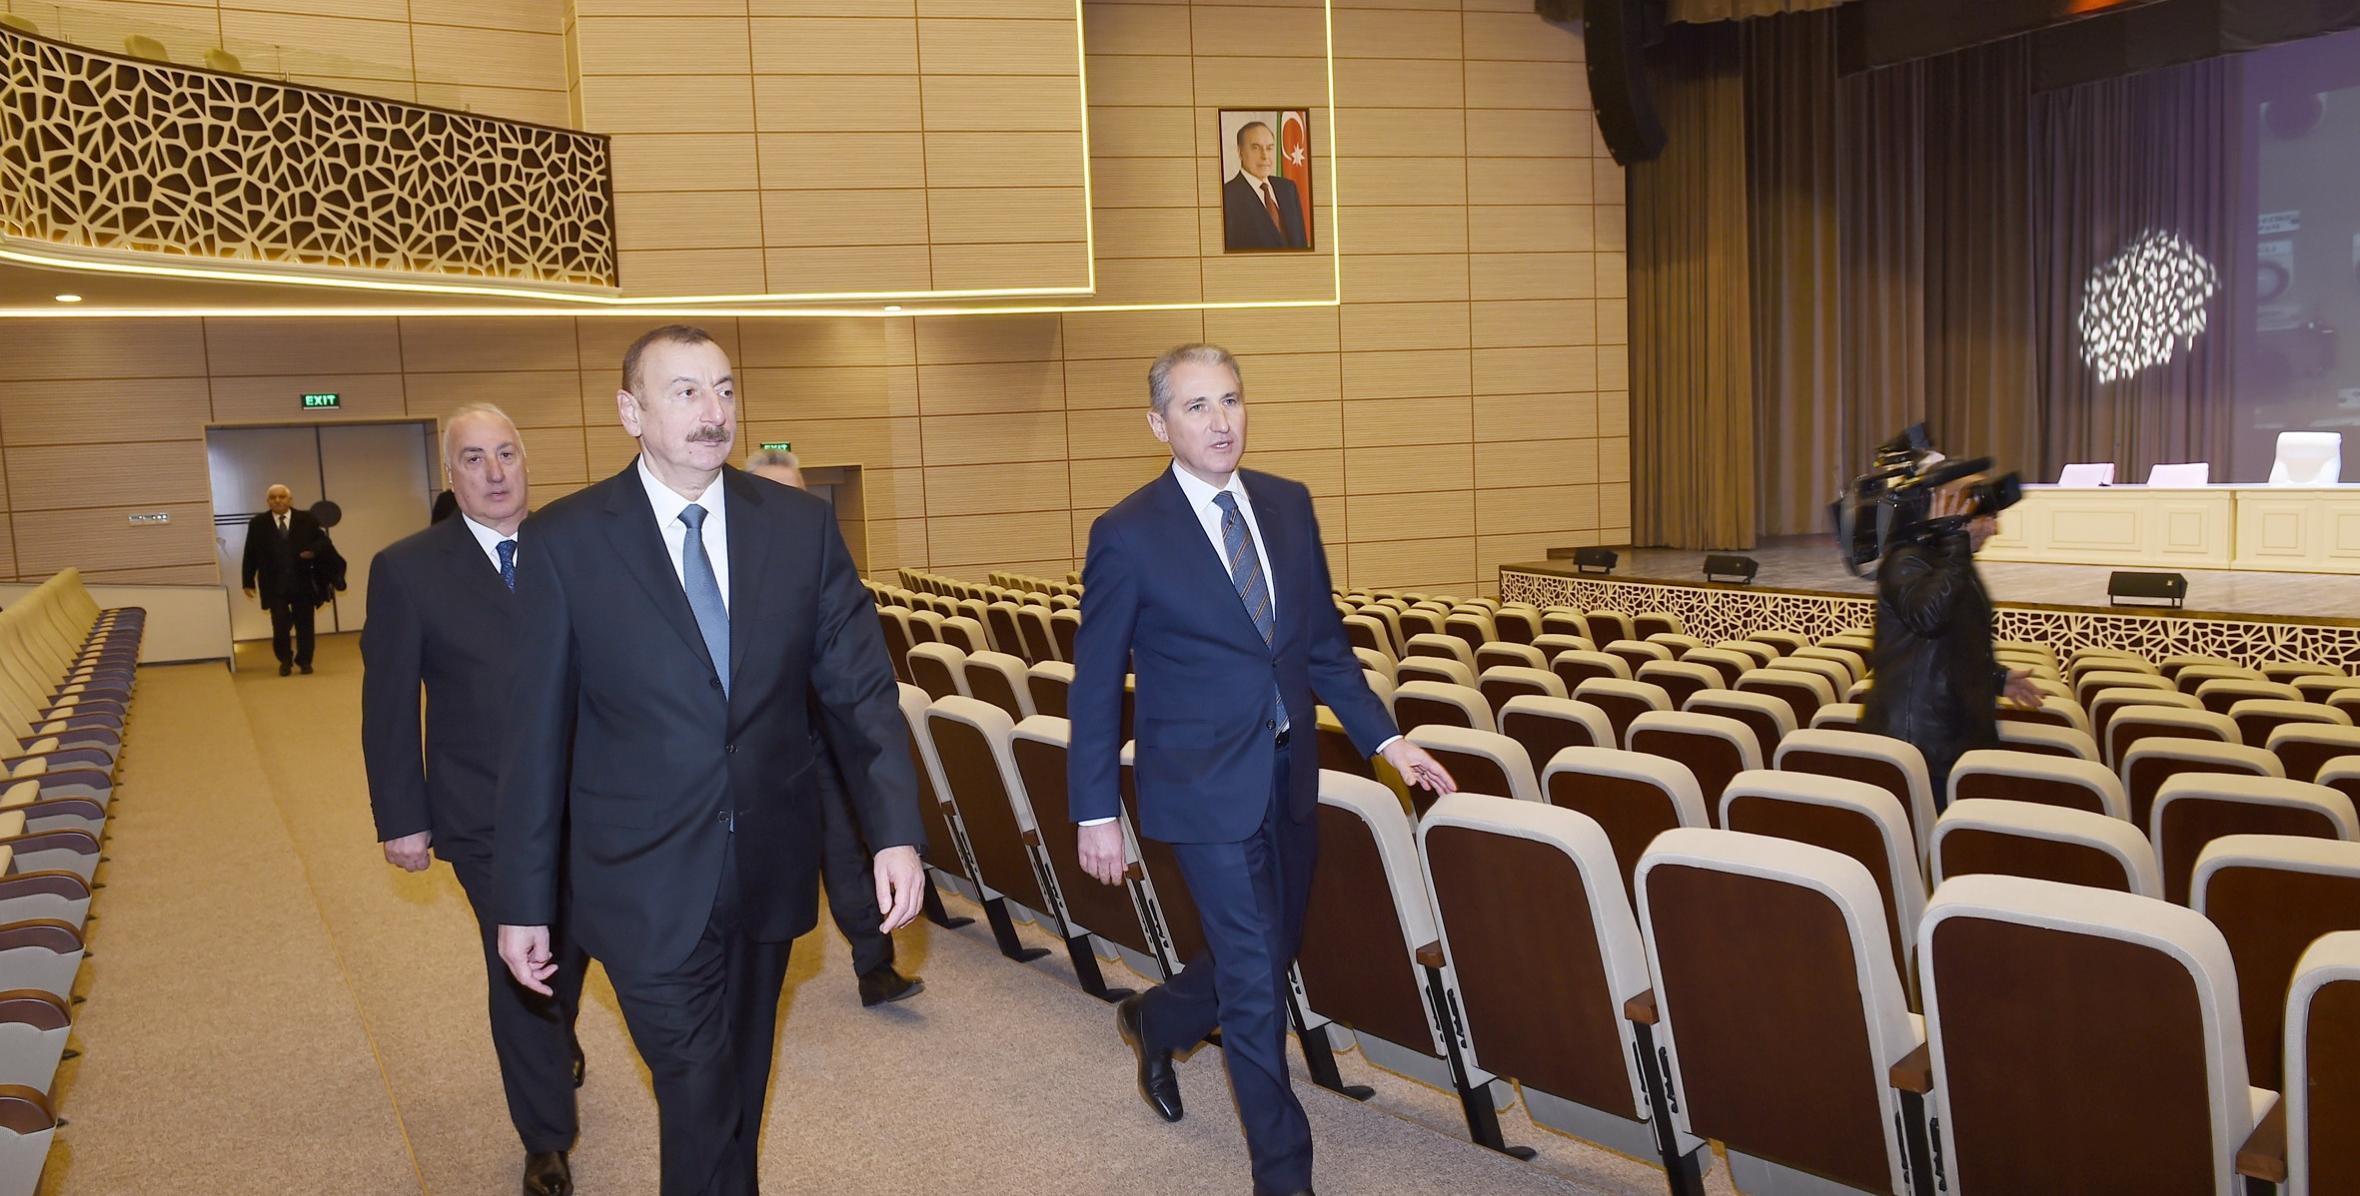 Ilham Aliyev viewed "Kimyachi" Culture Palace in Sumgayit after major overhaul